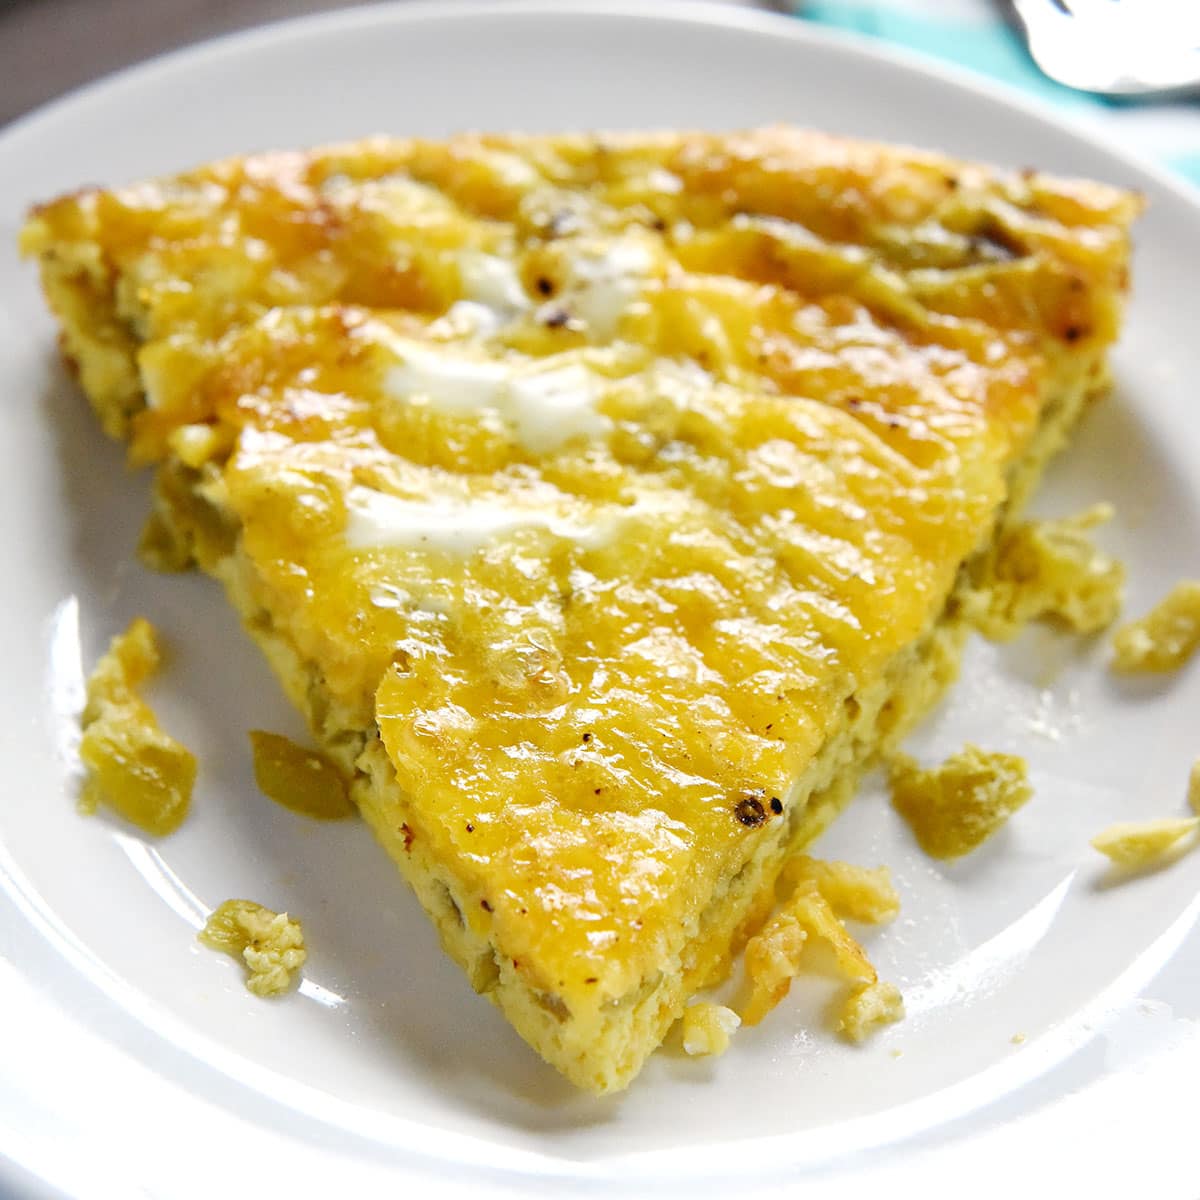 Easy Egg Bake, slice on plate with cheddar cheese and green chiles.